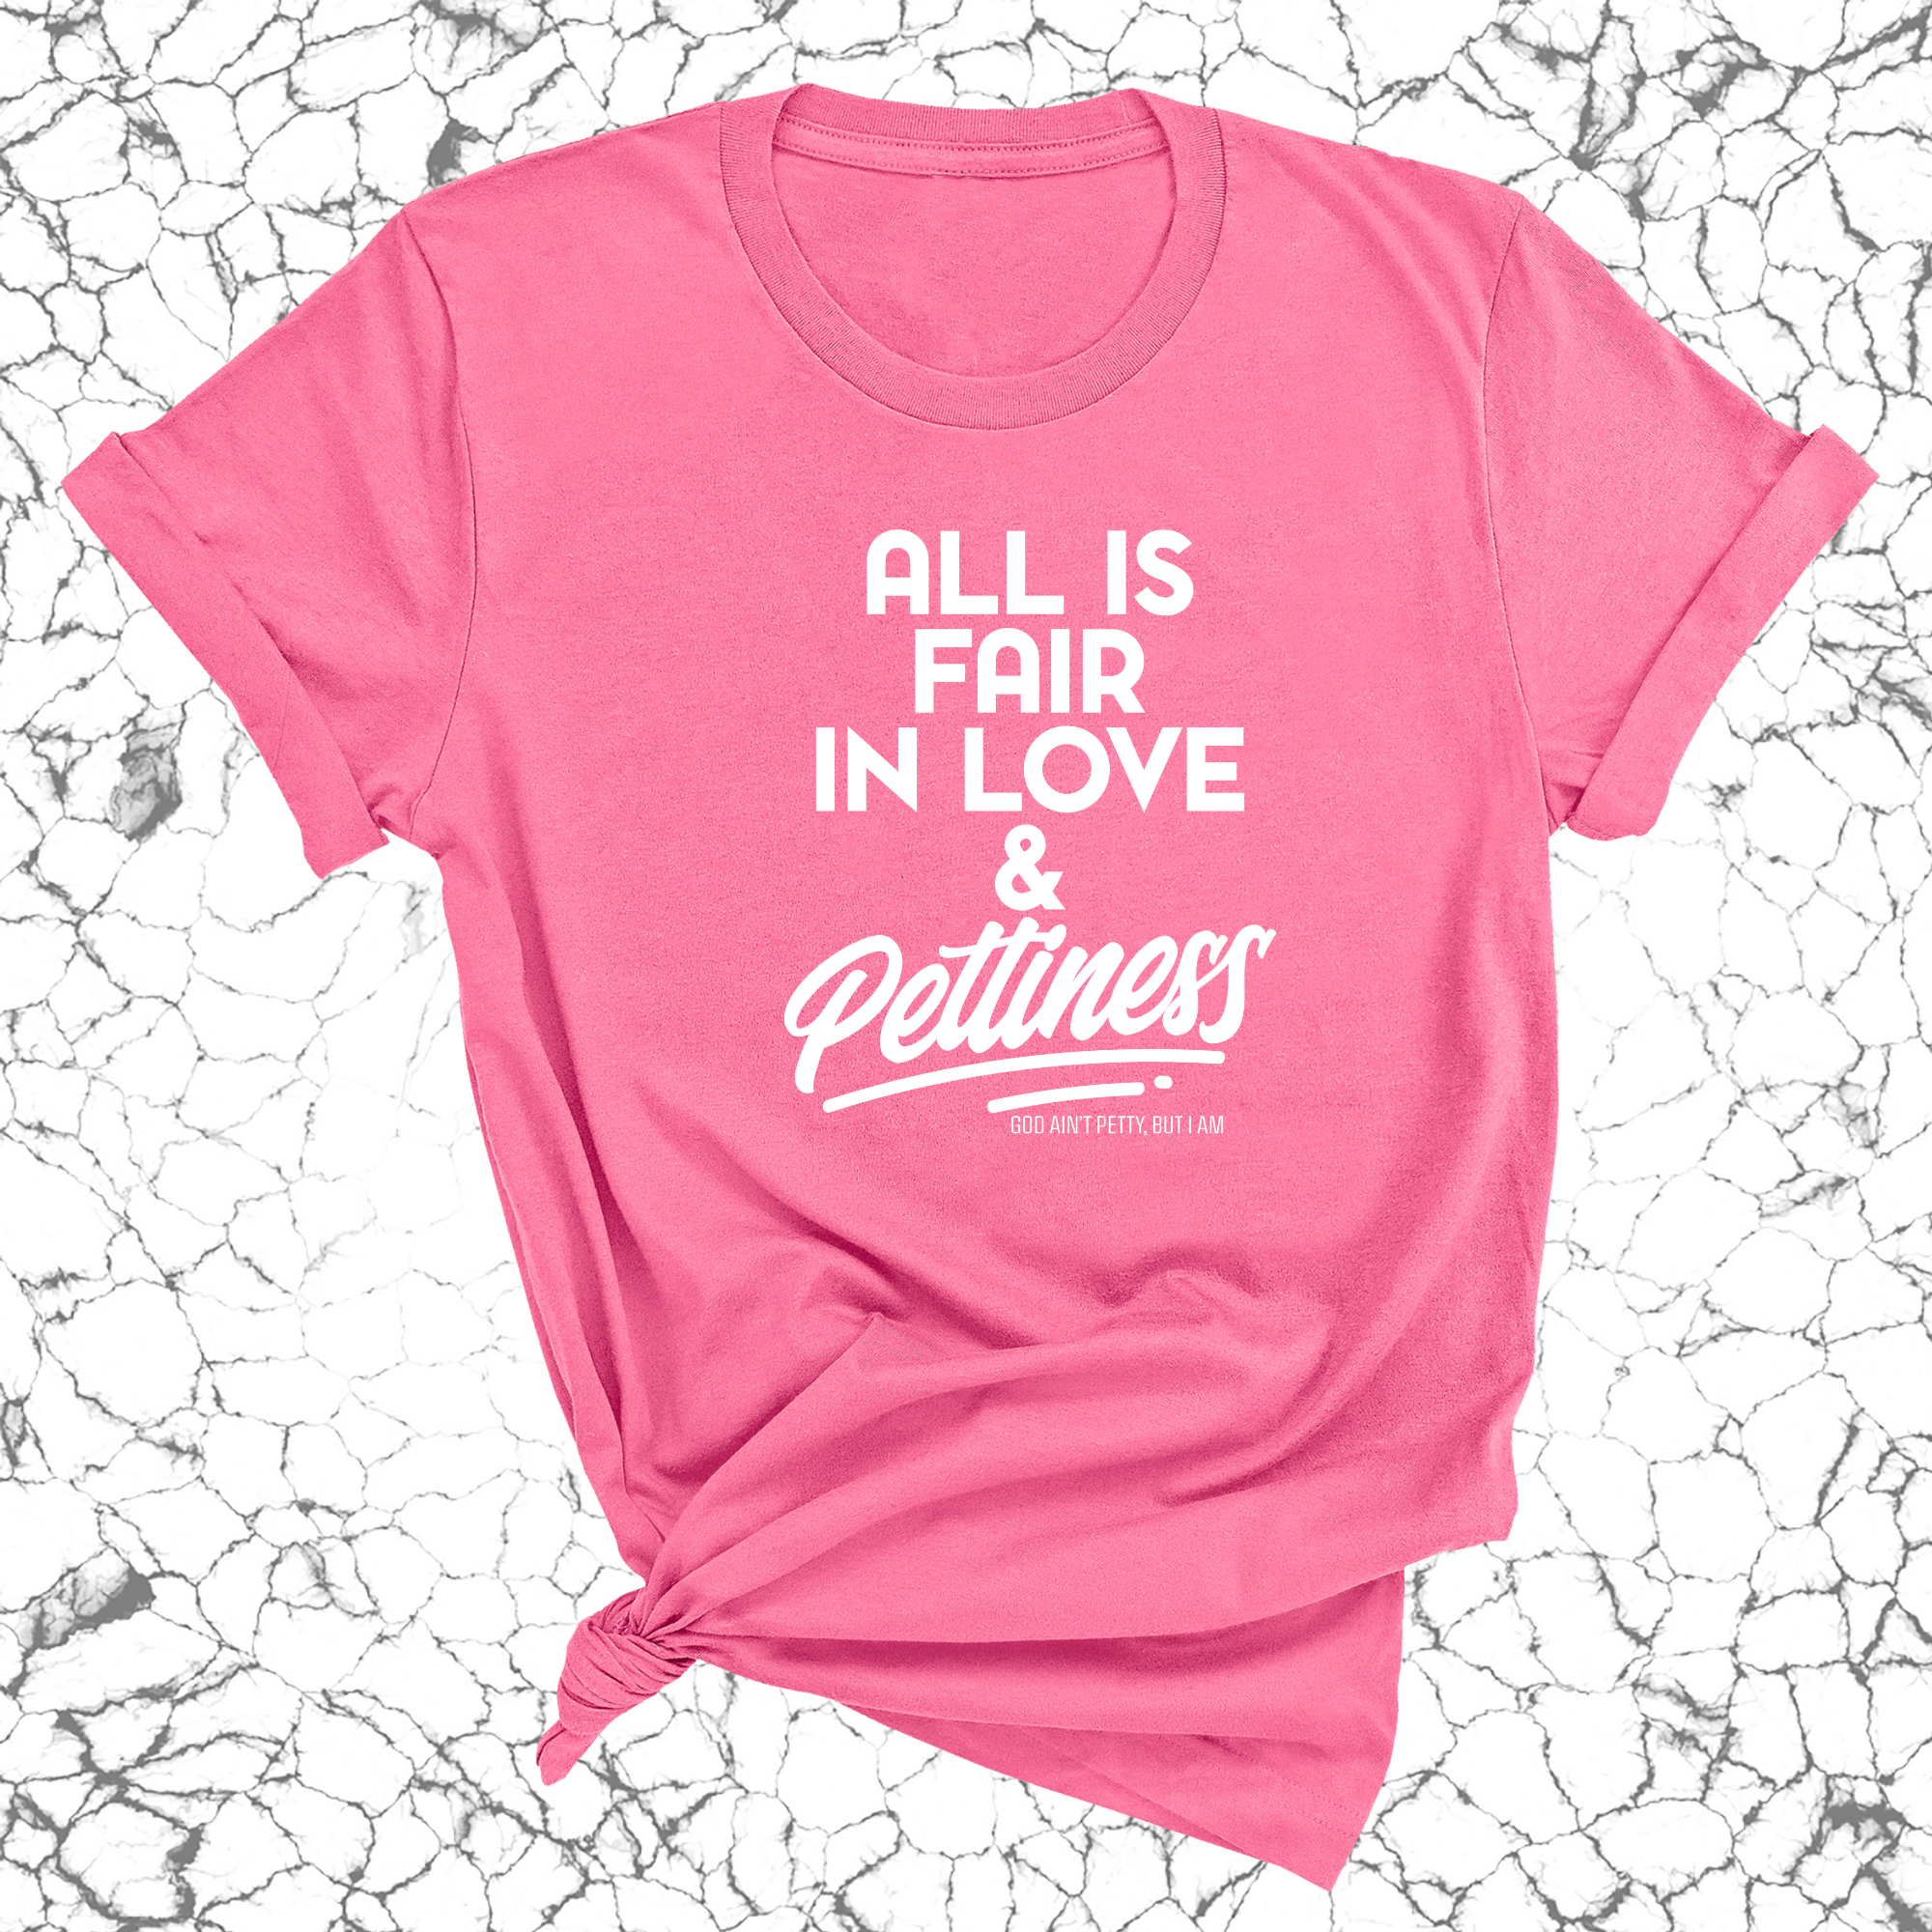 All is Fair in Love & Pettiness Unisex Tee-T-Shirt-The Original God Ain't Petty But I Am